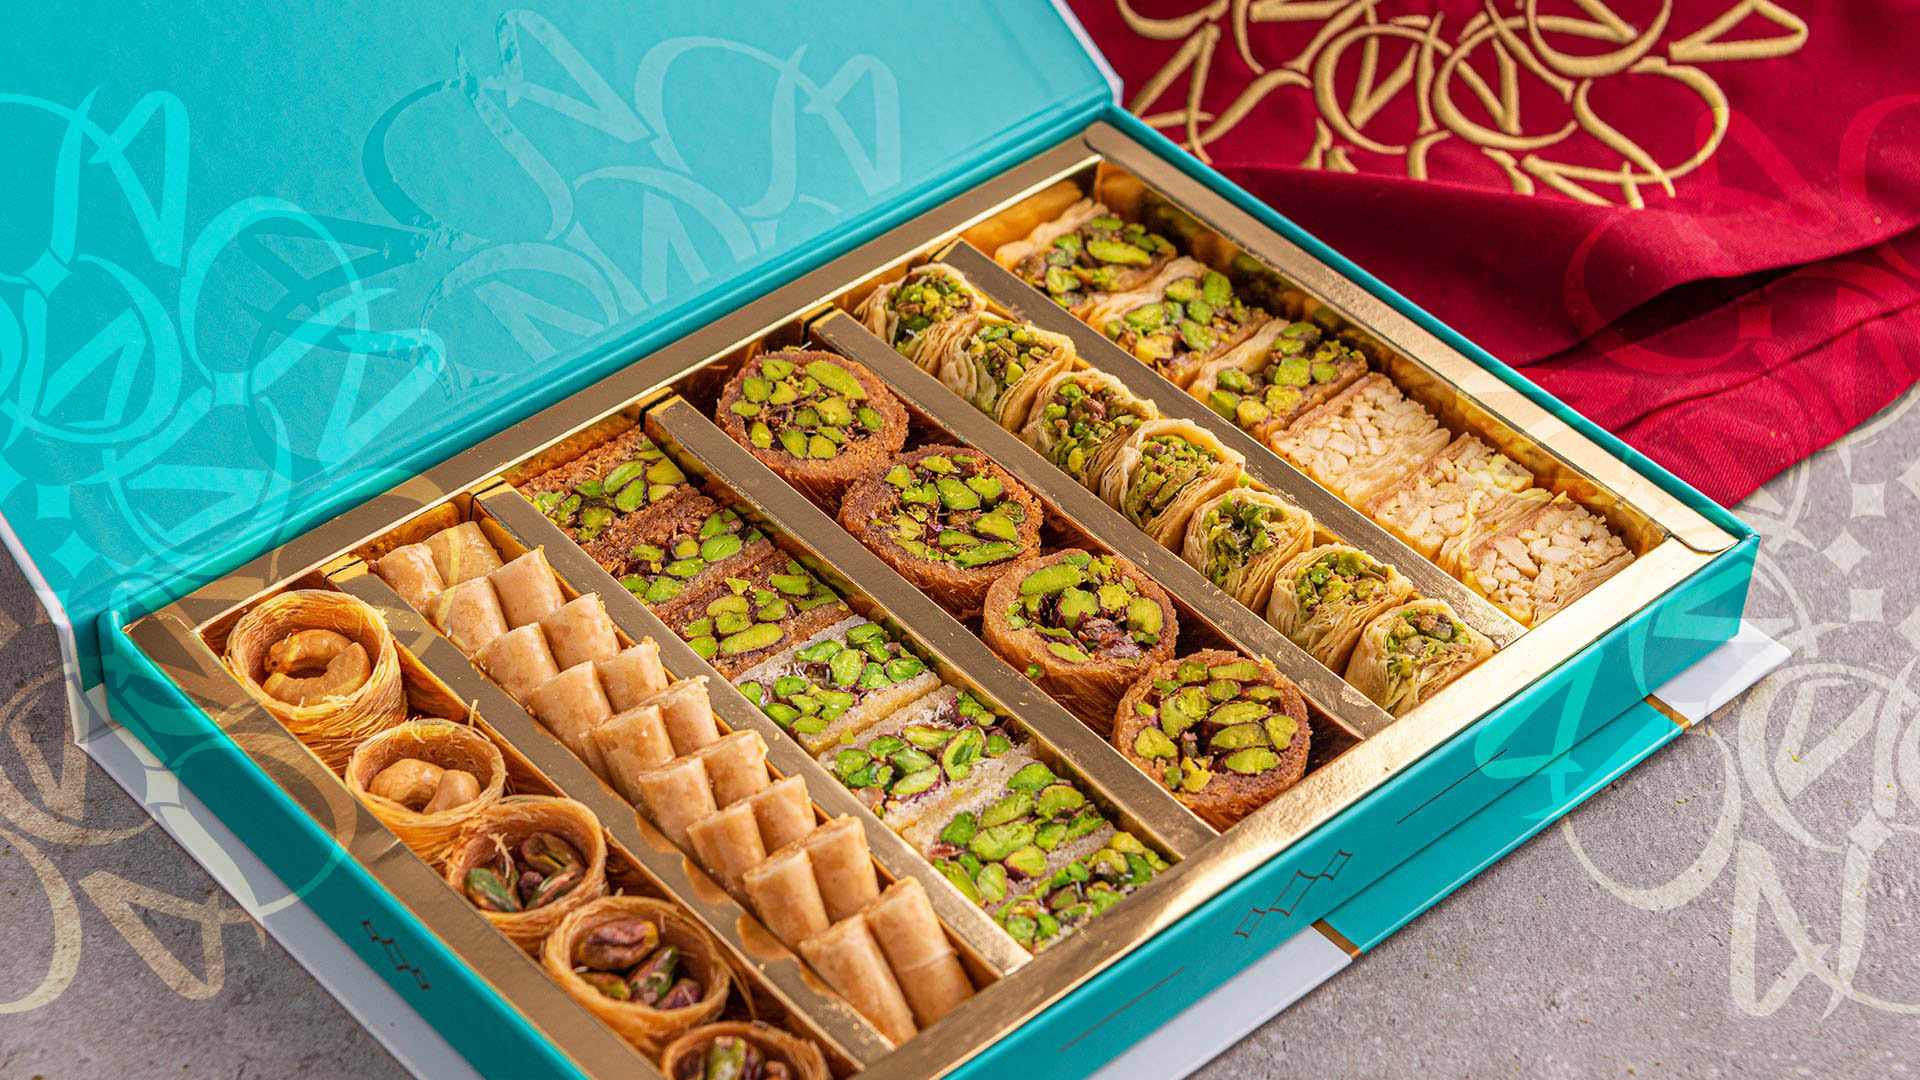 Discover Our Turkish Delights: Experience the Best Turkish Sweets in Sharjah from Our Renowned Sweets Shop​